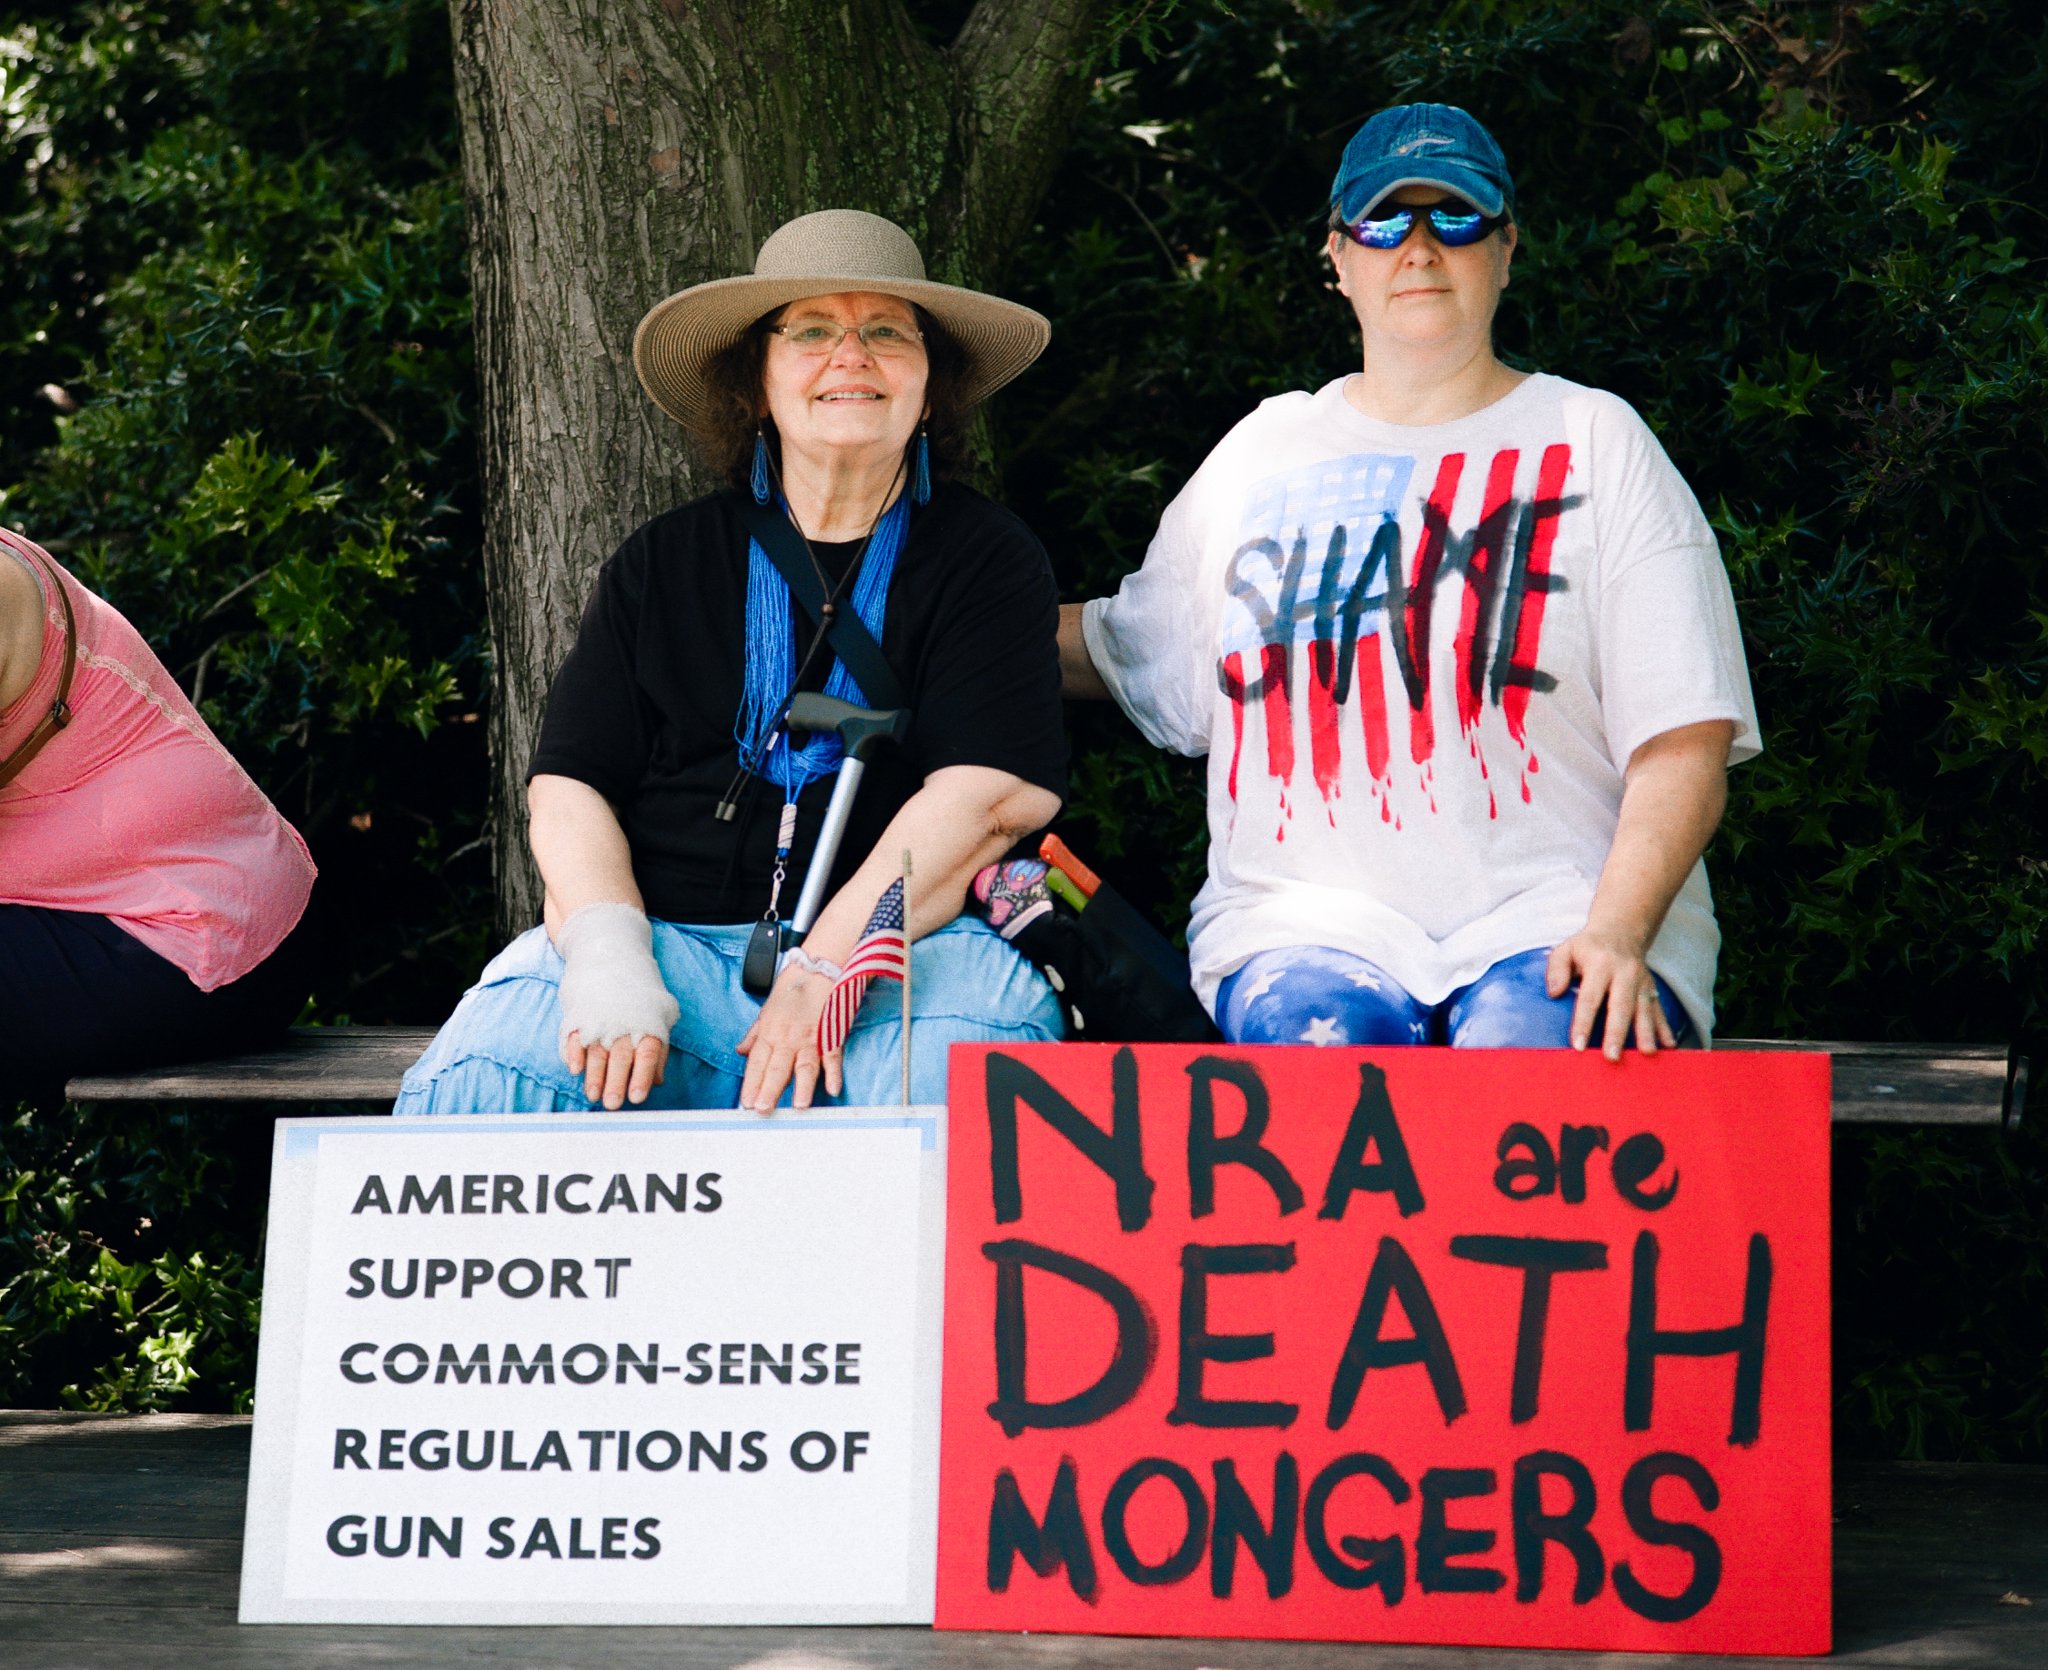 Empowering photos from the NRA protests in Houston